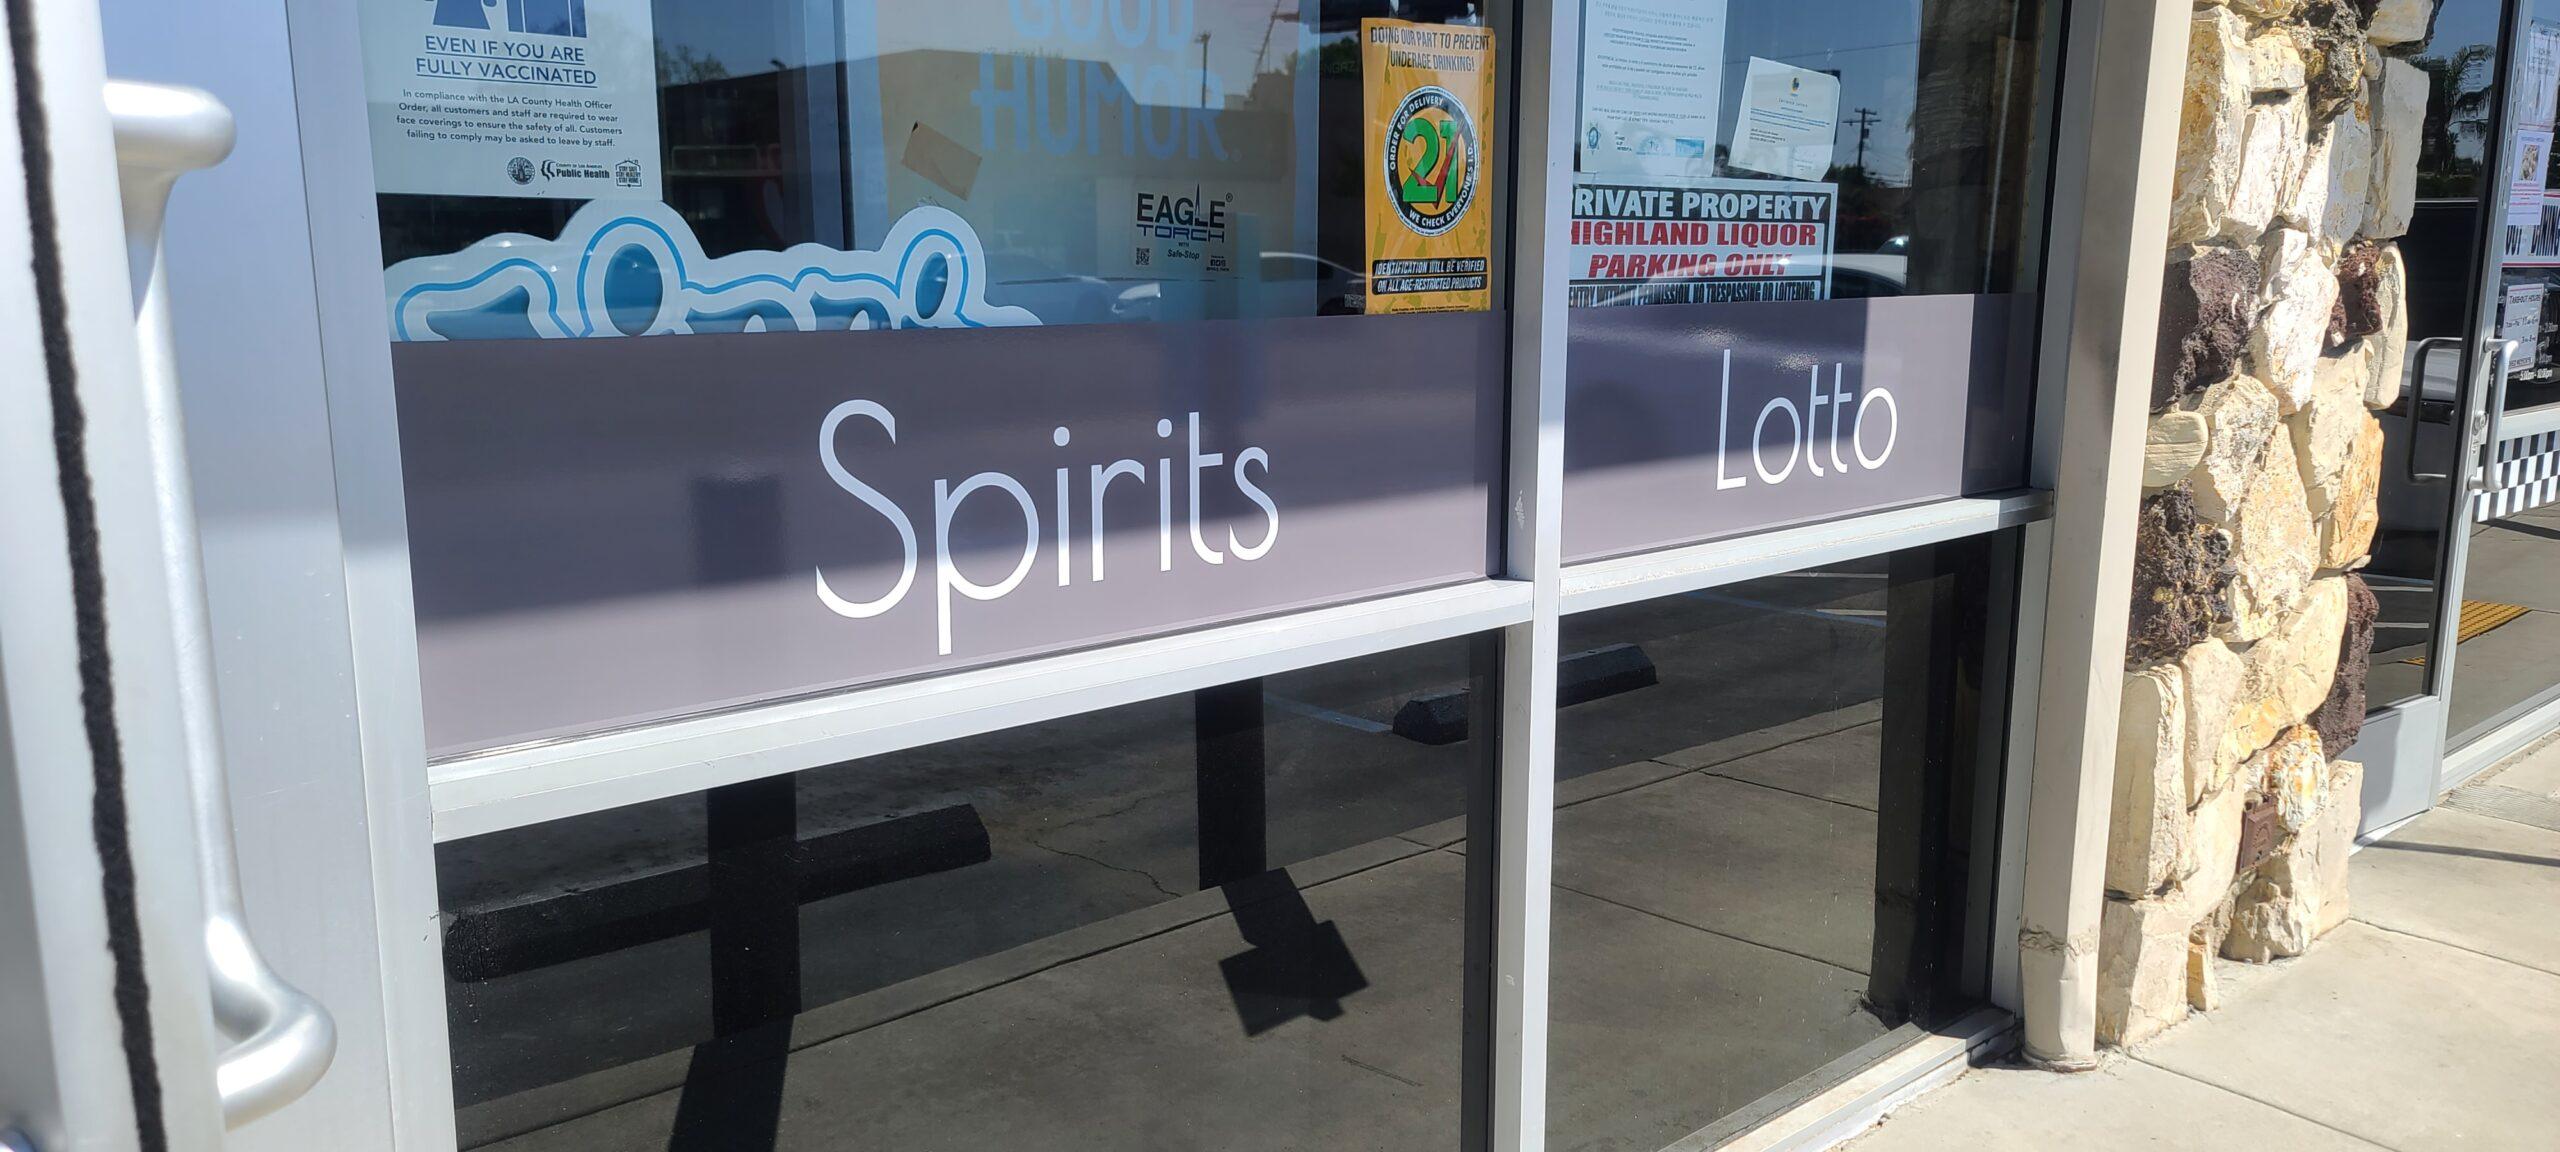 These are the storefront window graphics we created and installed for Highland Liquor in Granada Hills.